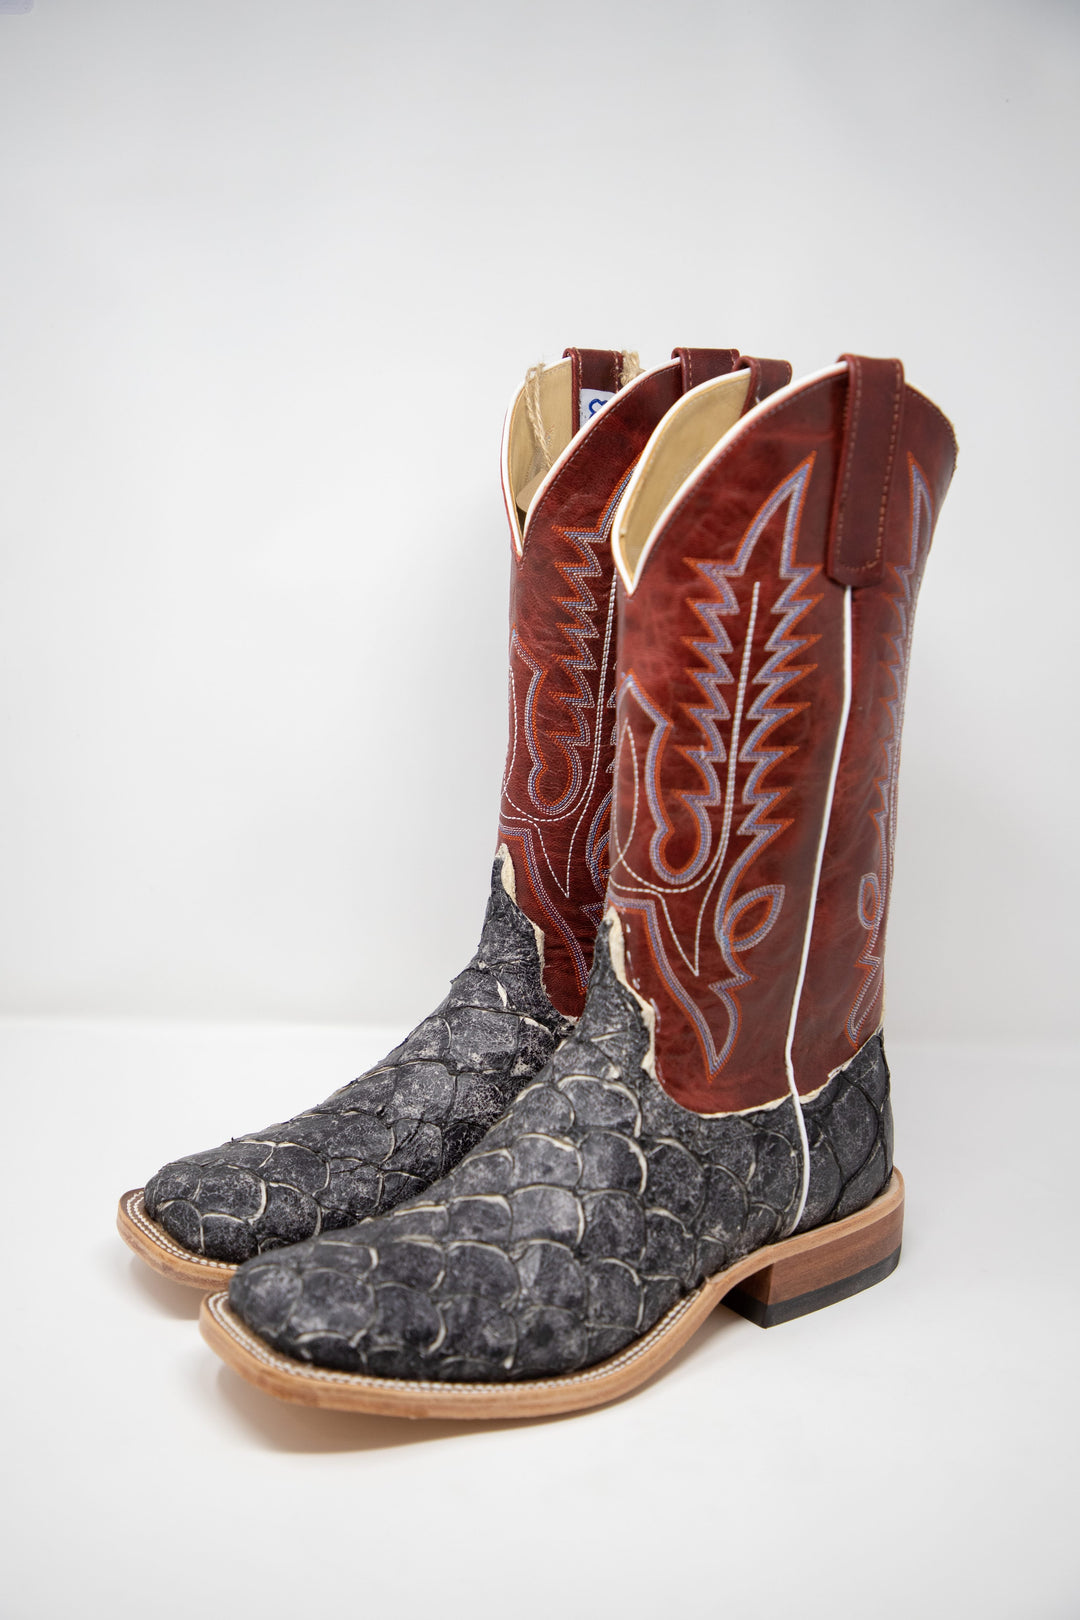 Lazy J Exclusive Anderson Bean Men's Slick Bass Fish Red Explosion Men's Boot